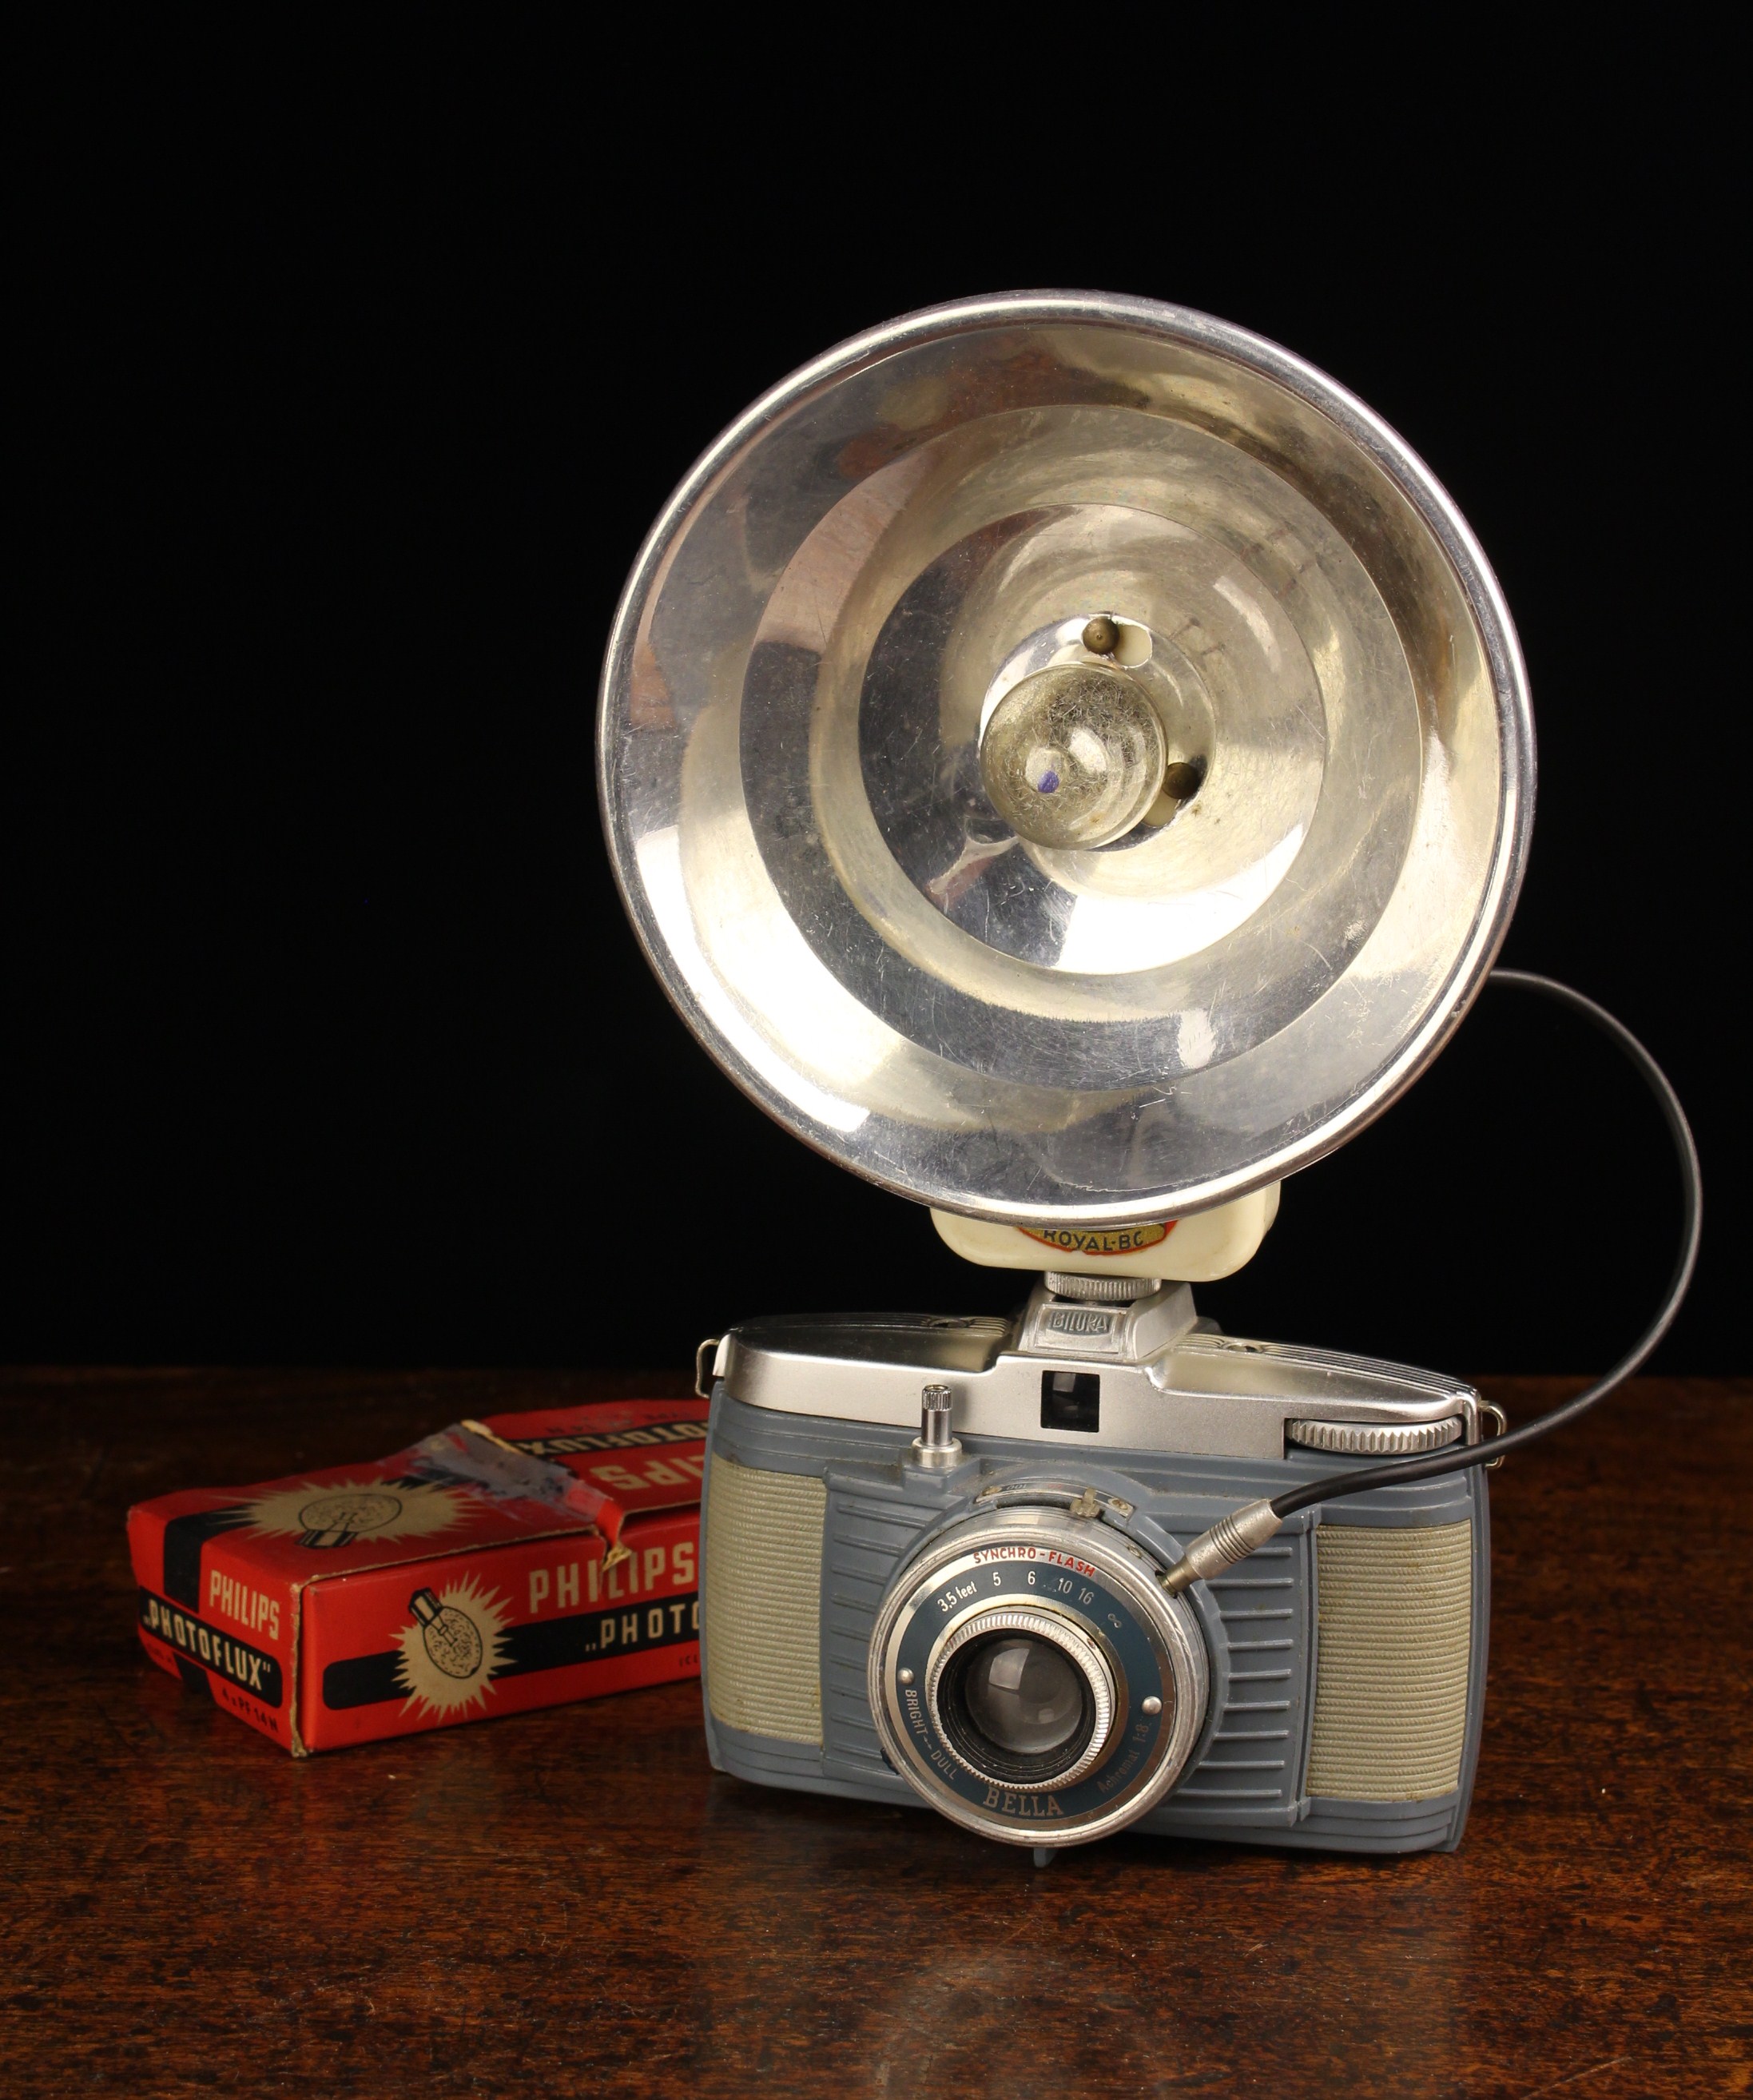 A Vintage German-made Bilora Bella D grey and green bodied Camera Circa 1950's, using 127 film,